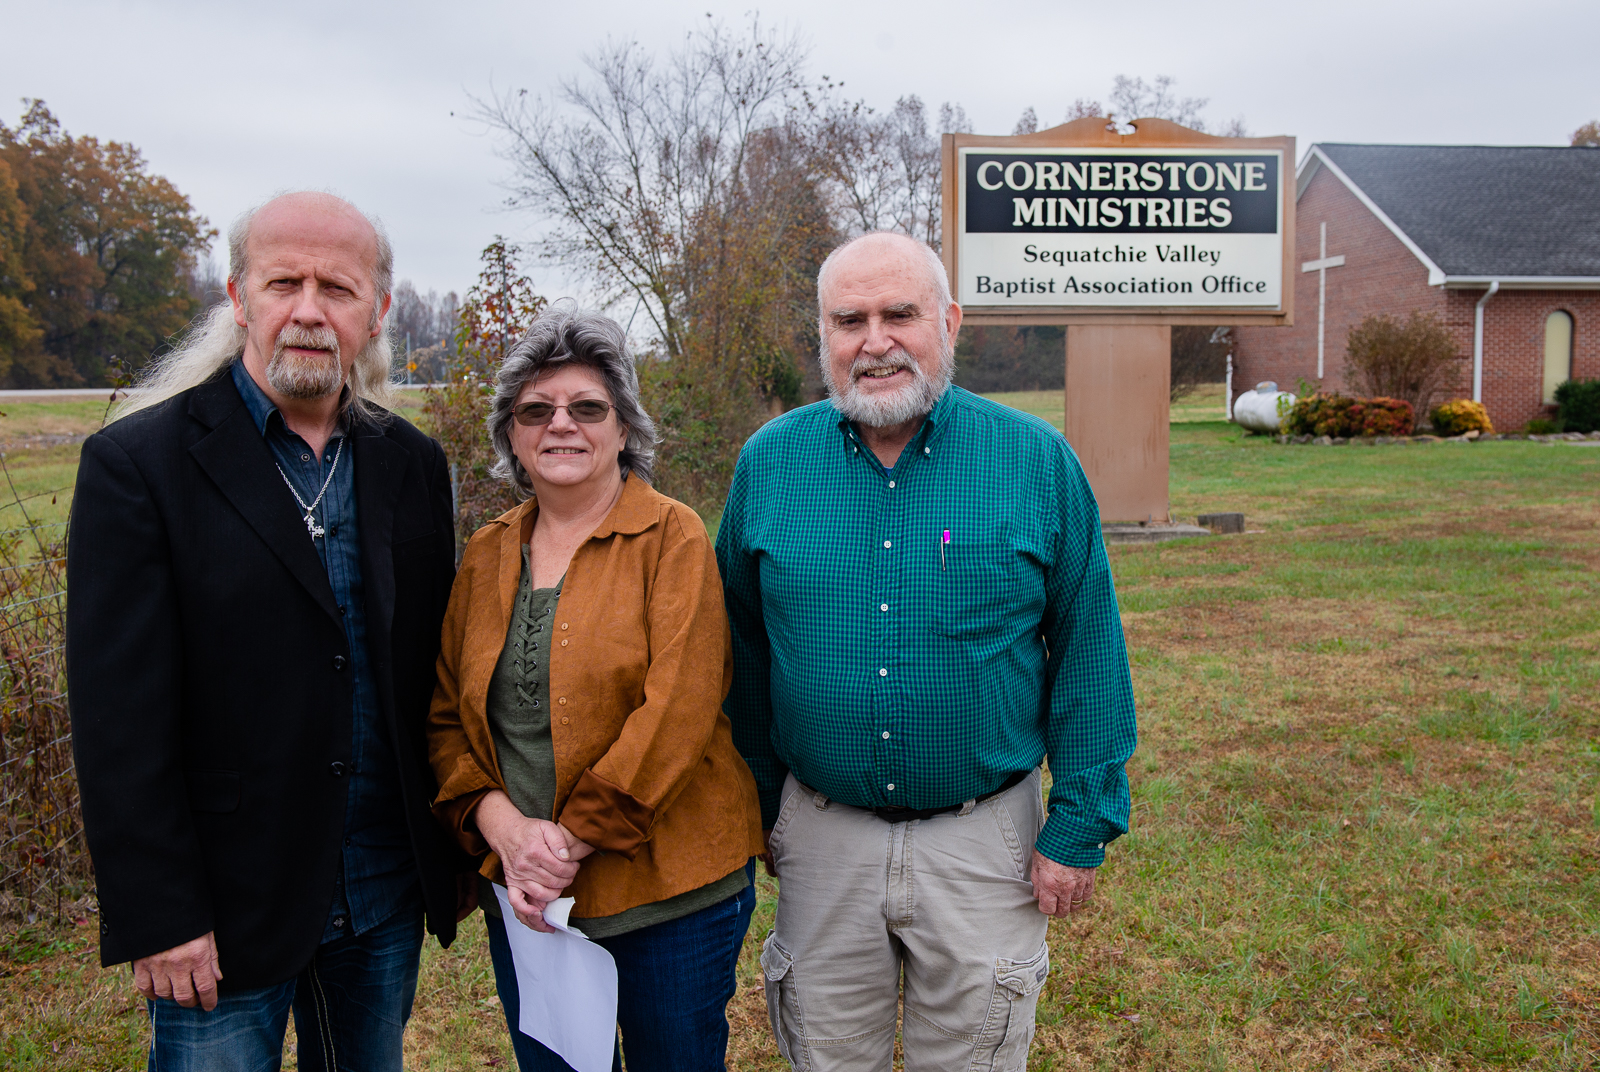  the leadership team is, from left, Dave Berry, director of Assisting Those That Are In Need (ATTAIN); Theresa  Gilliam, director of the Community Kitchen; and Richard Lewelling, director of Missions, Cornerstone Ministries